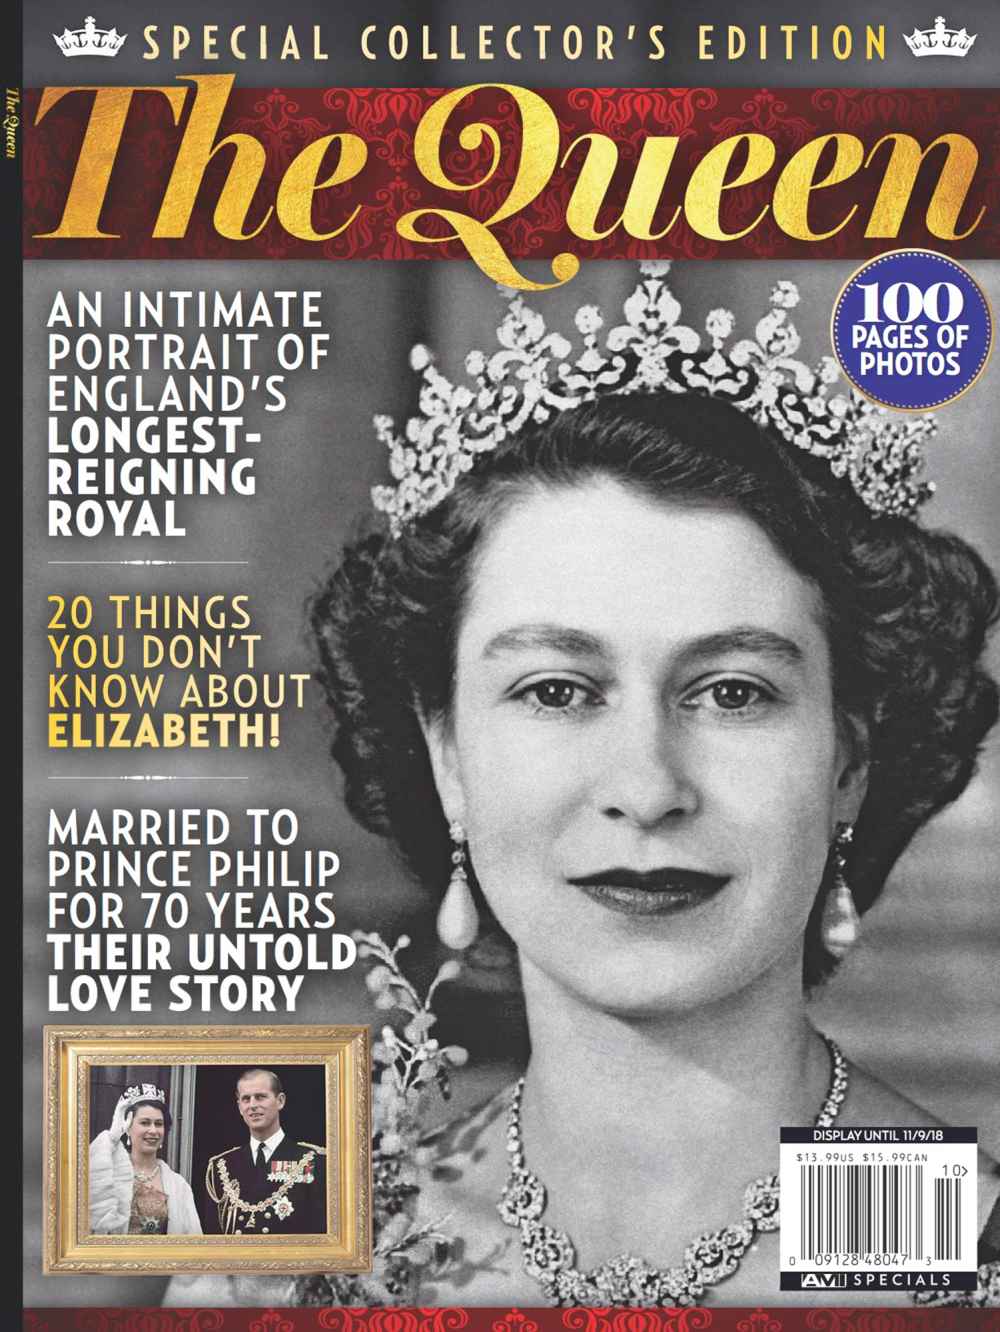 Why Queen Elizabeth Ii Can Drive Without A License Us Weekly